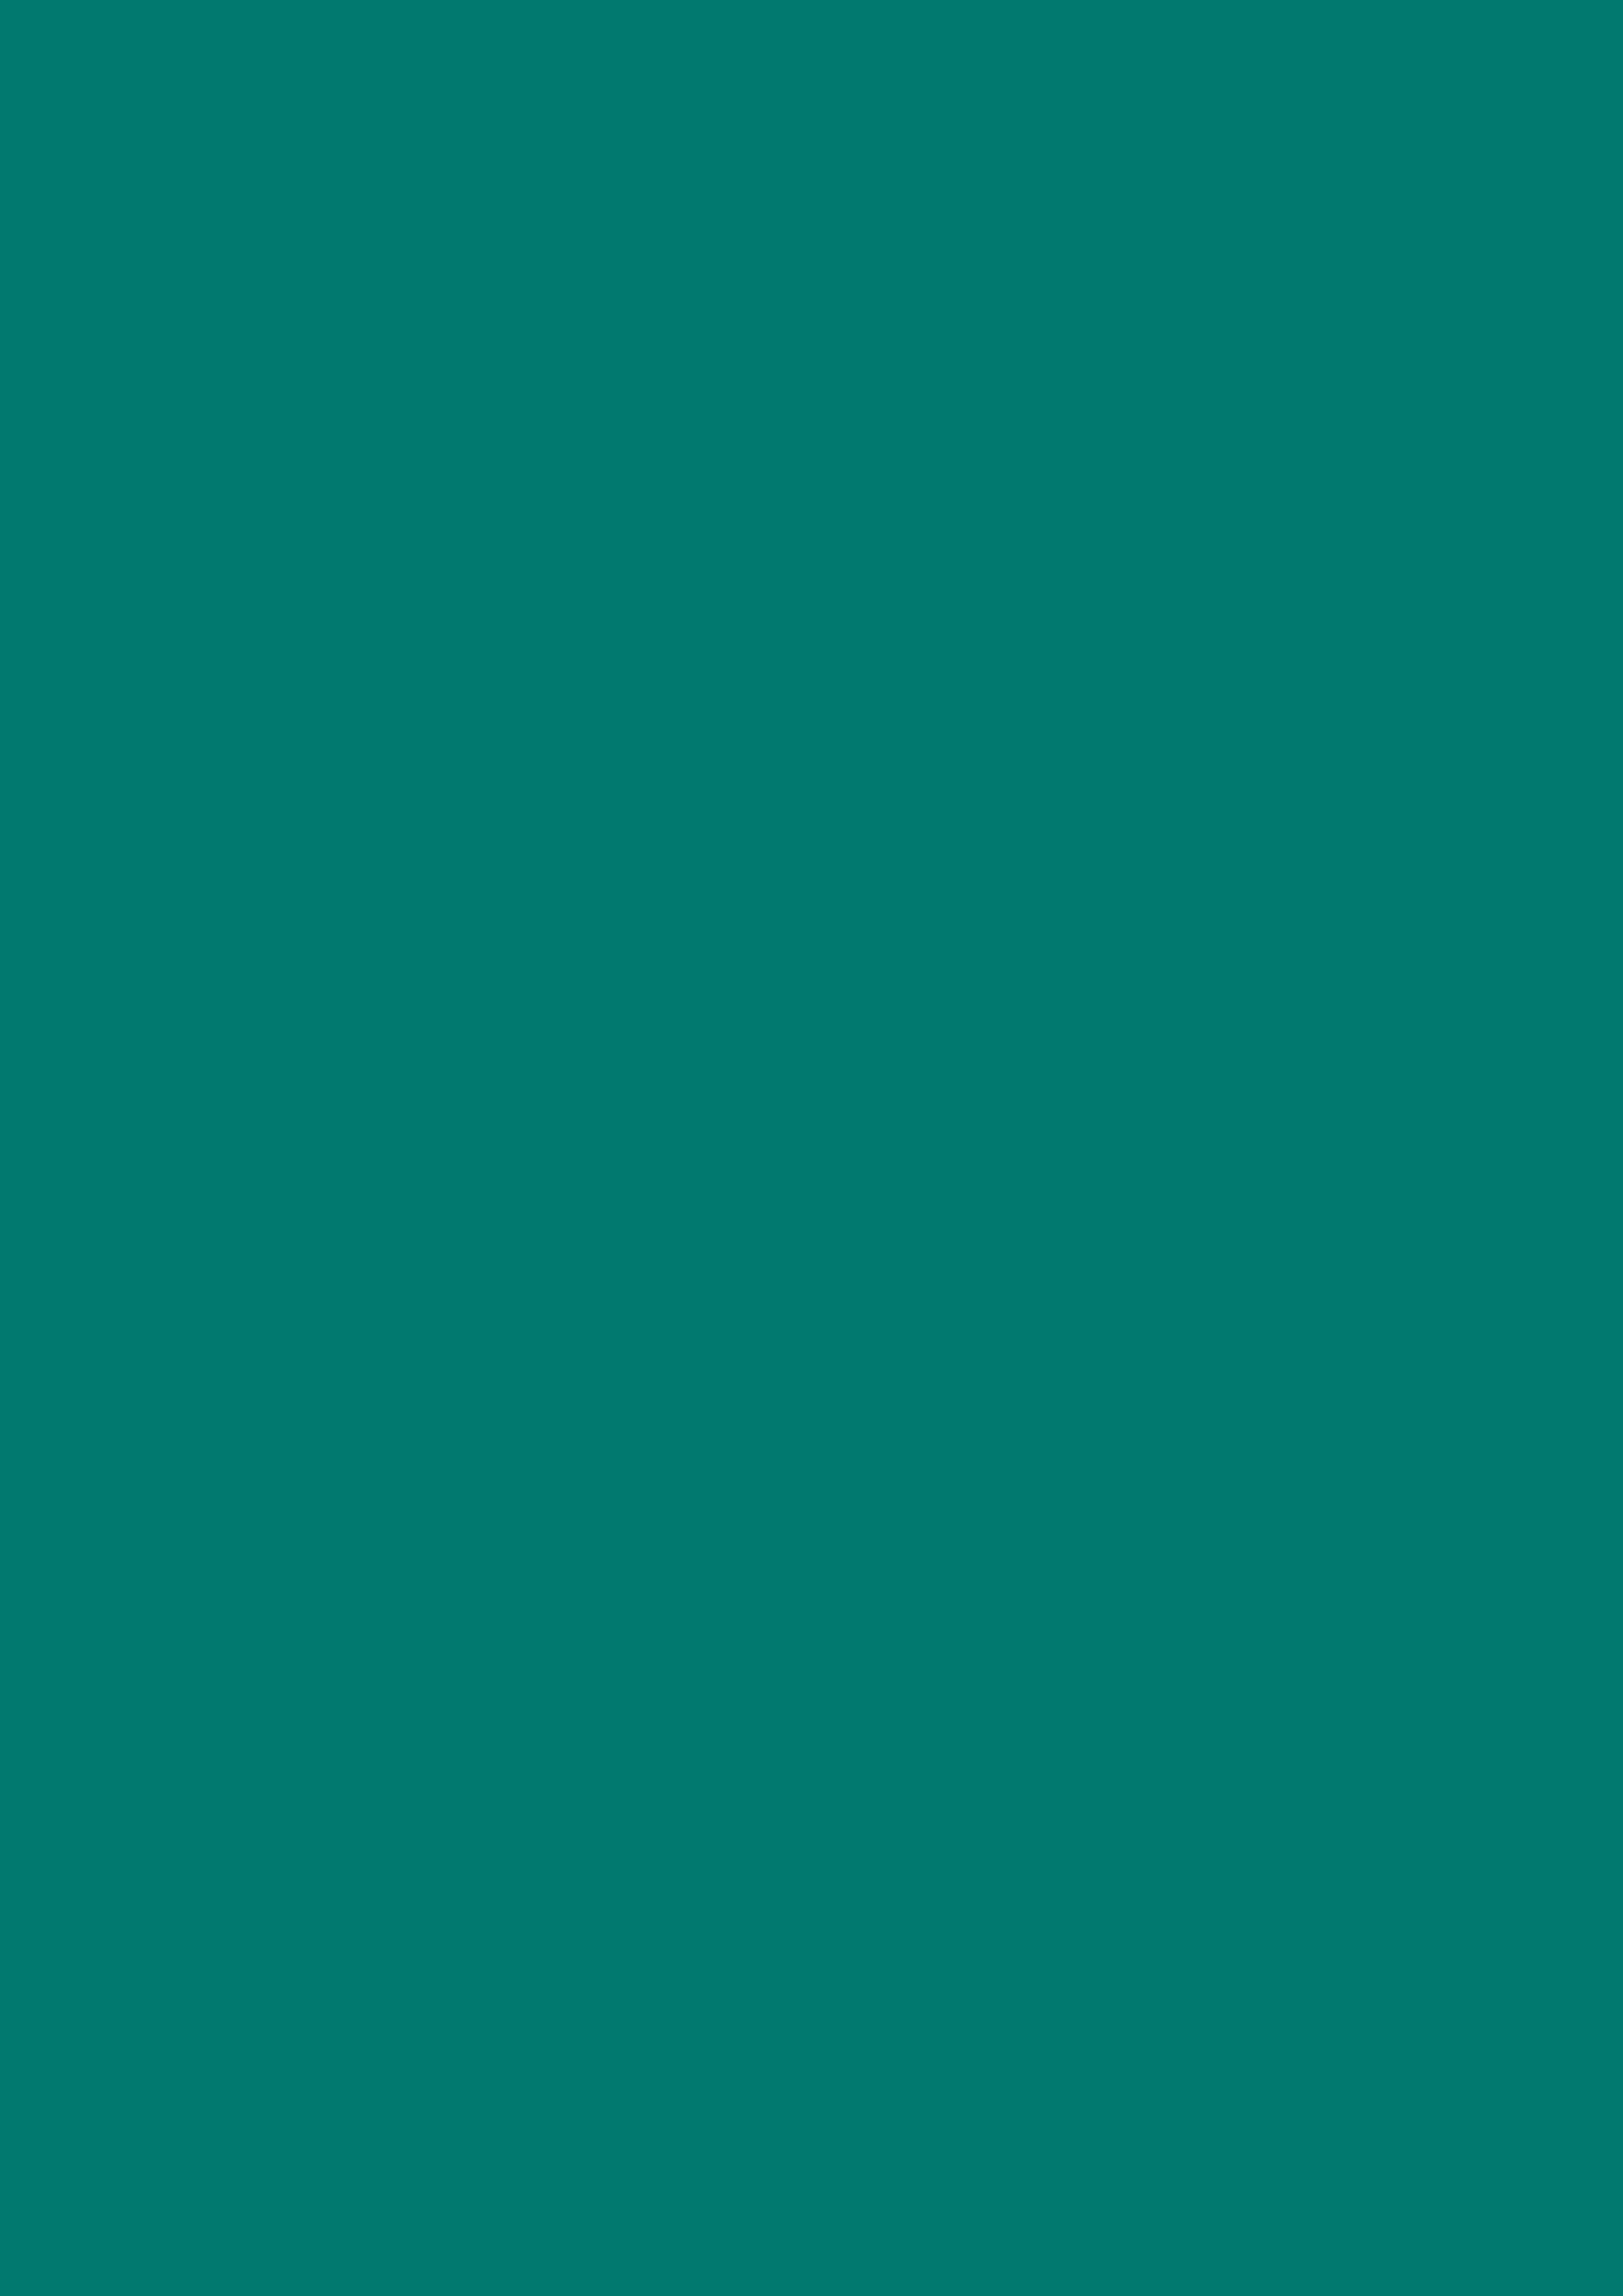 2480x3508 Pine Green Solid Color Background